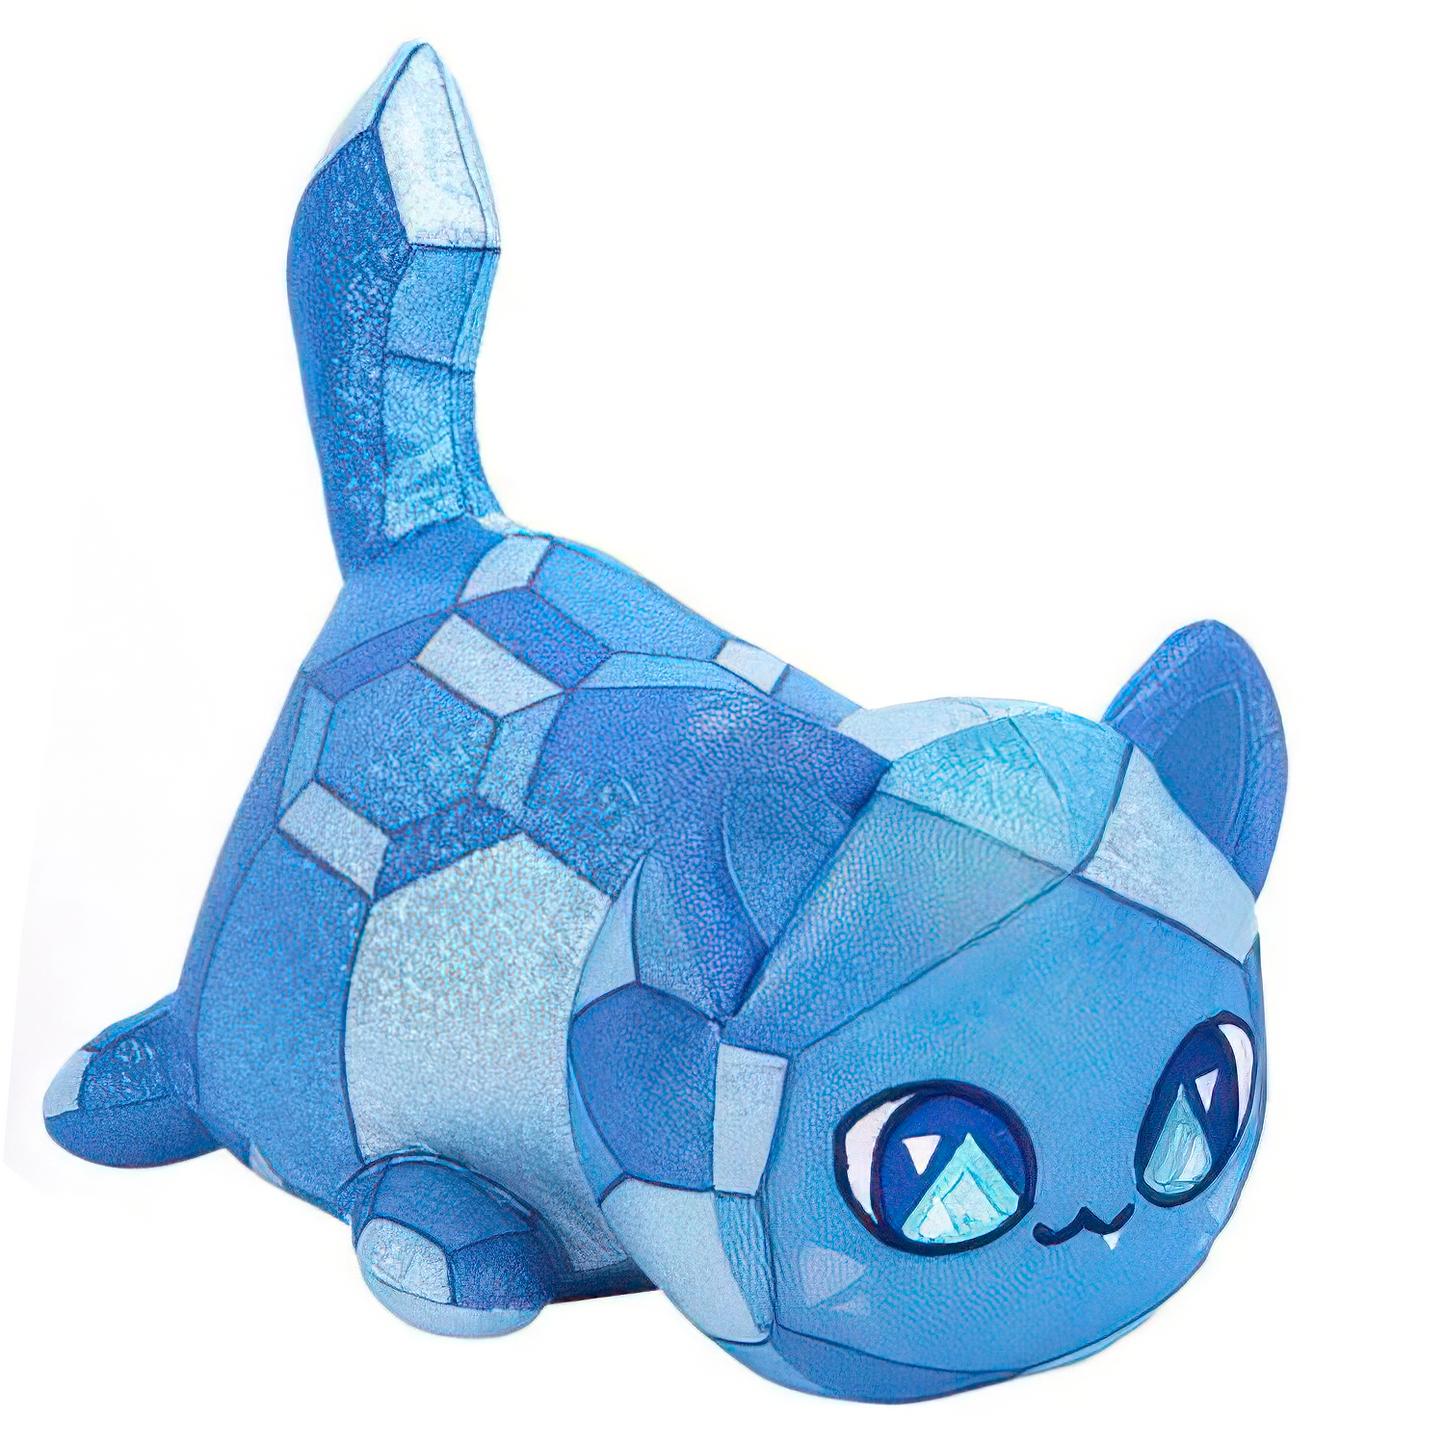 SAPPHIRE CAT - MeeMeows Litter 4 from Aphmau (BRAND NEW) Cute Kitty Plushie!